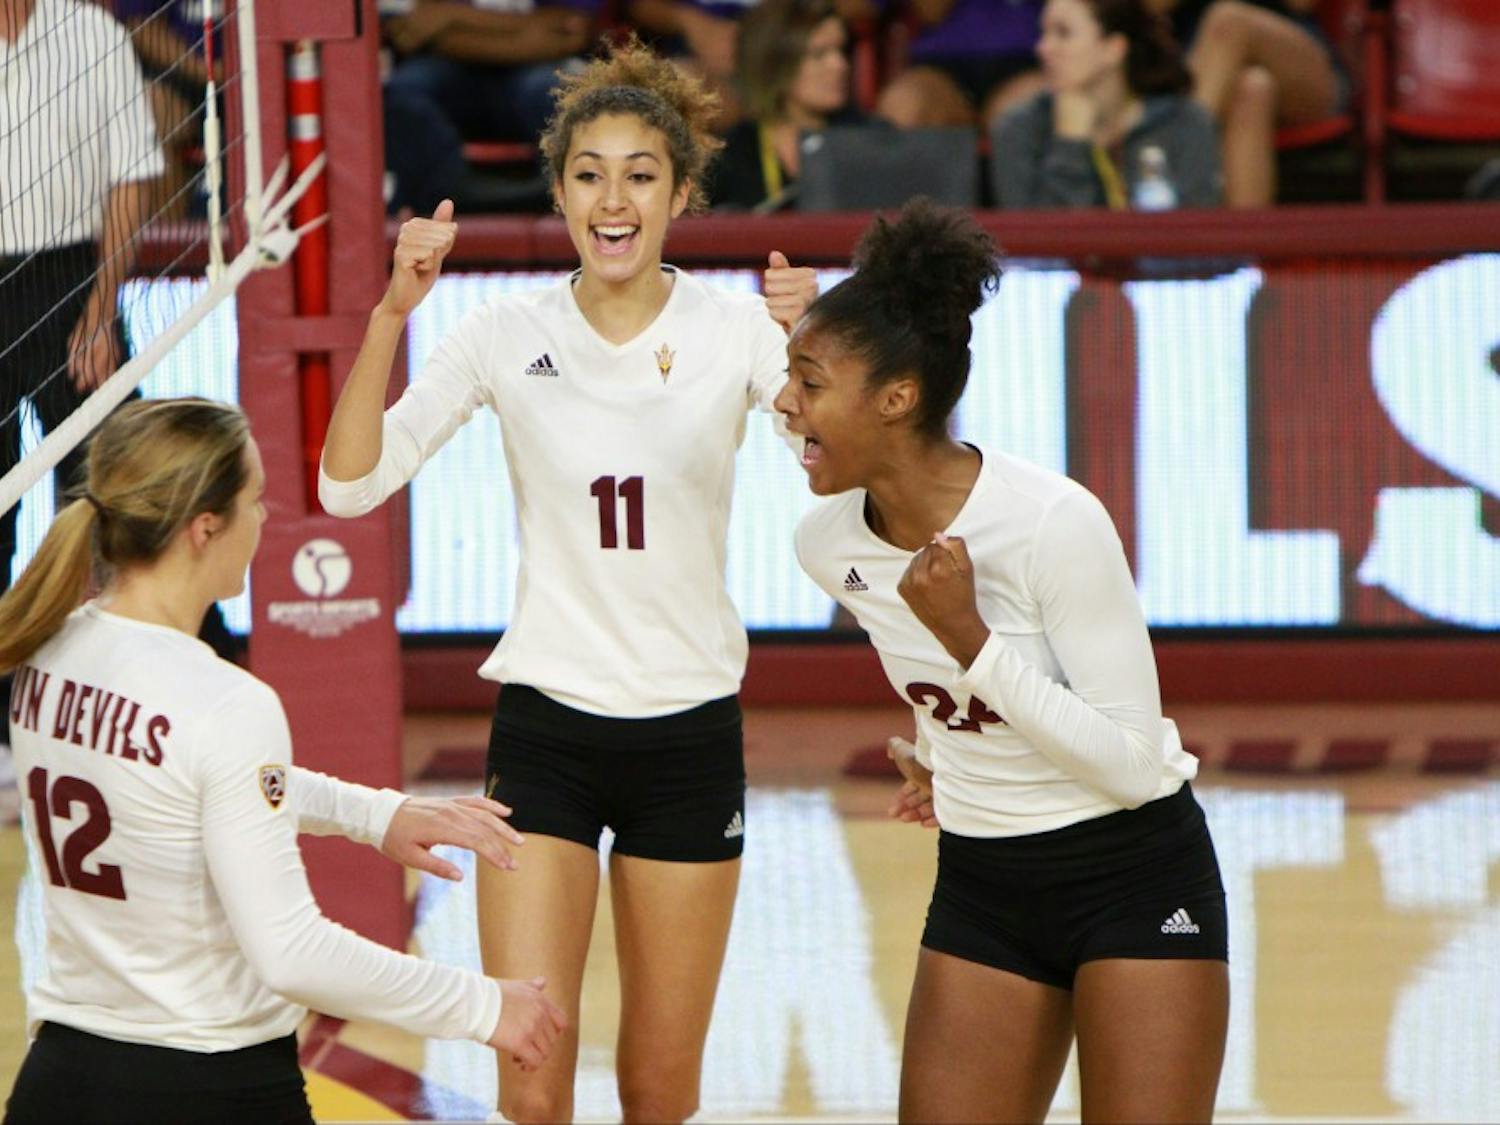 against Texas Southern Saturday, Sept. 19, 2015 at Wells Fargo Arena in Tempe. The Sun Devils defeated the Lady Tigers three games to none (25-15, 25-17, 25-8).